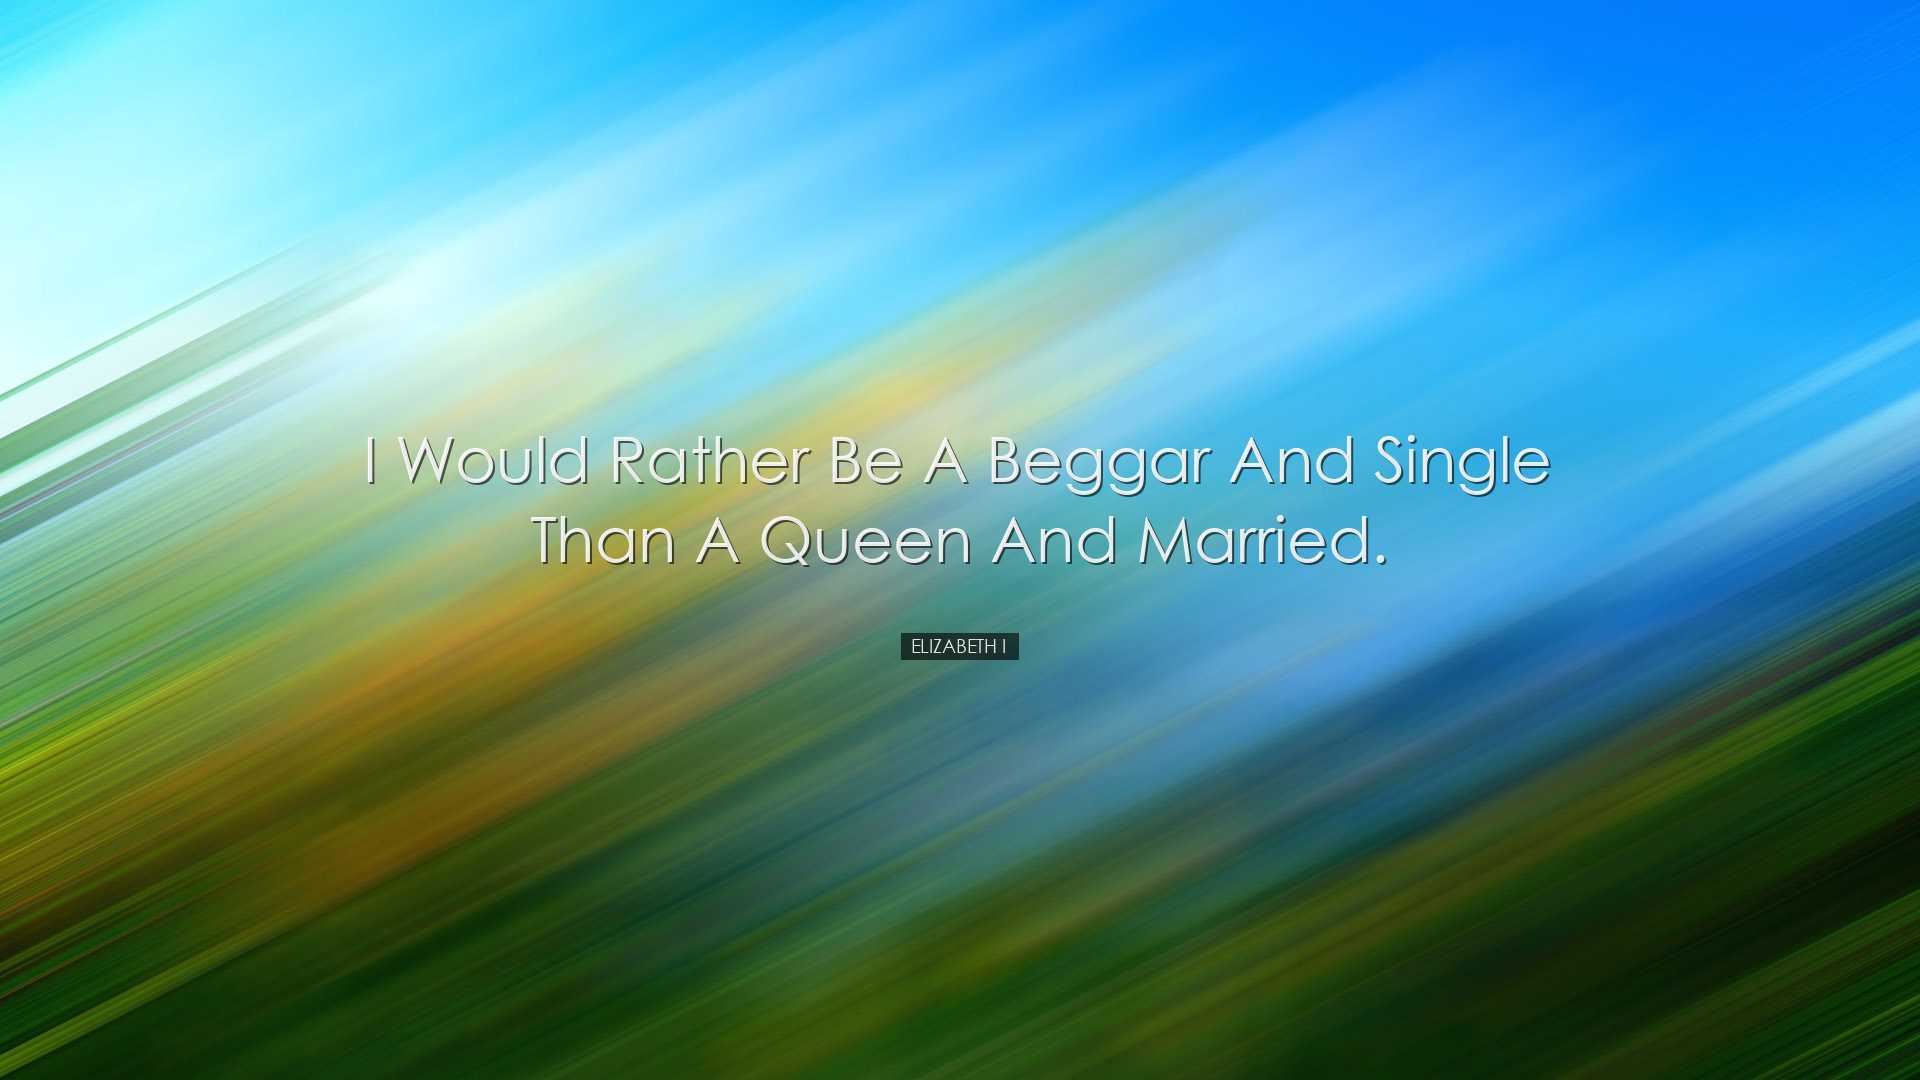 I would rather be a beggar and single than a queen and married. -